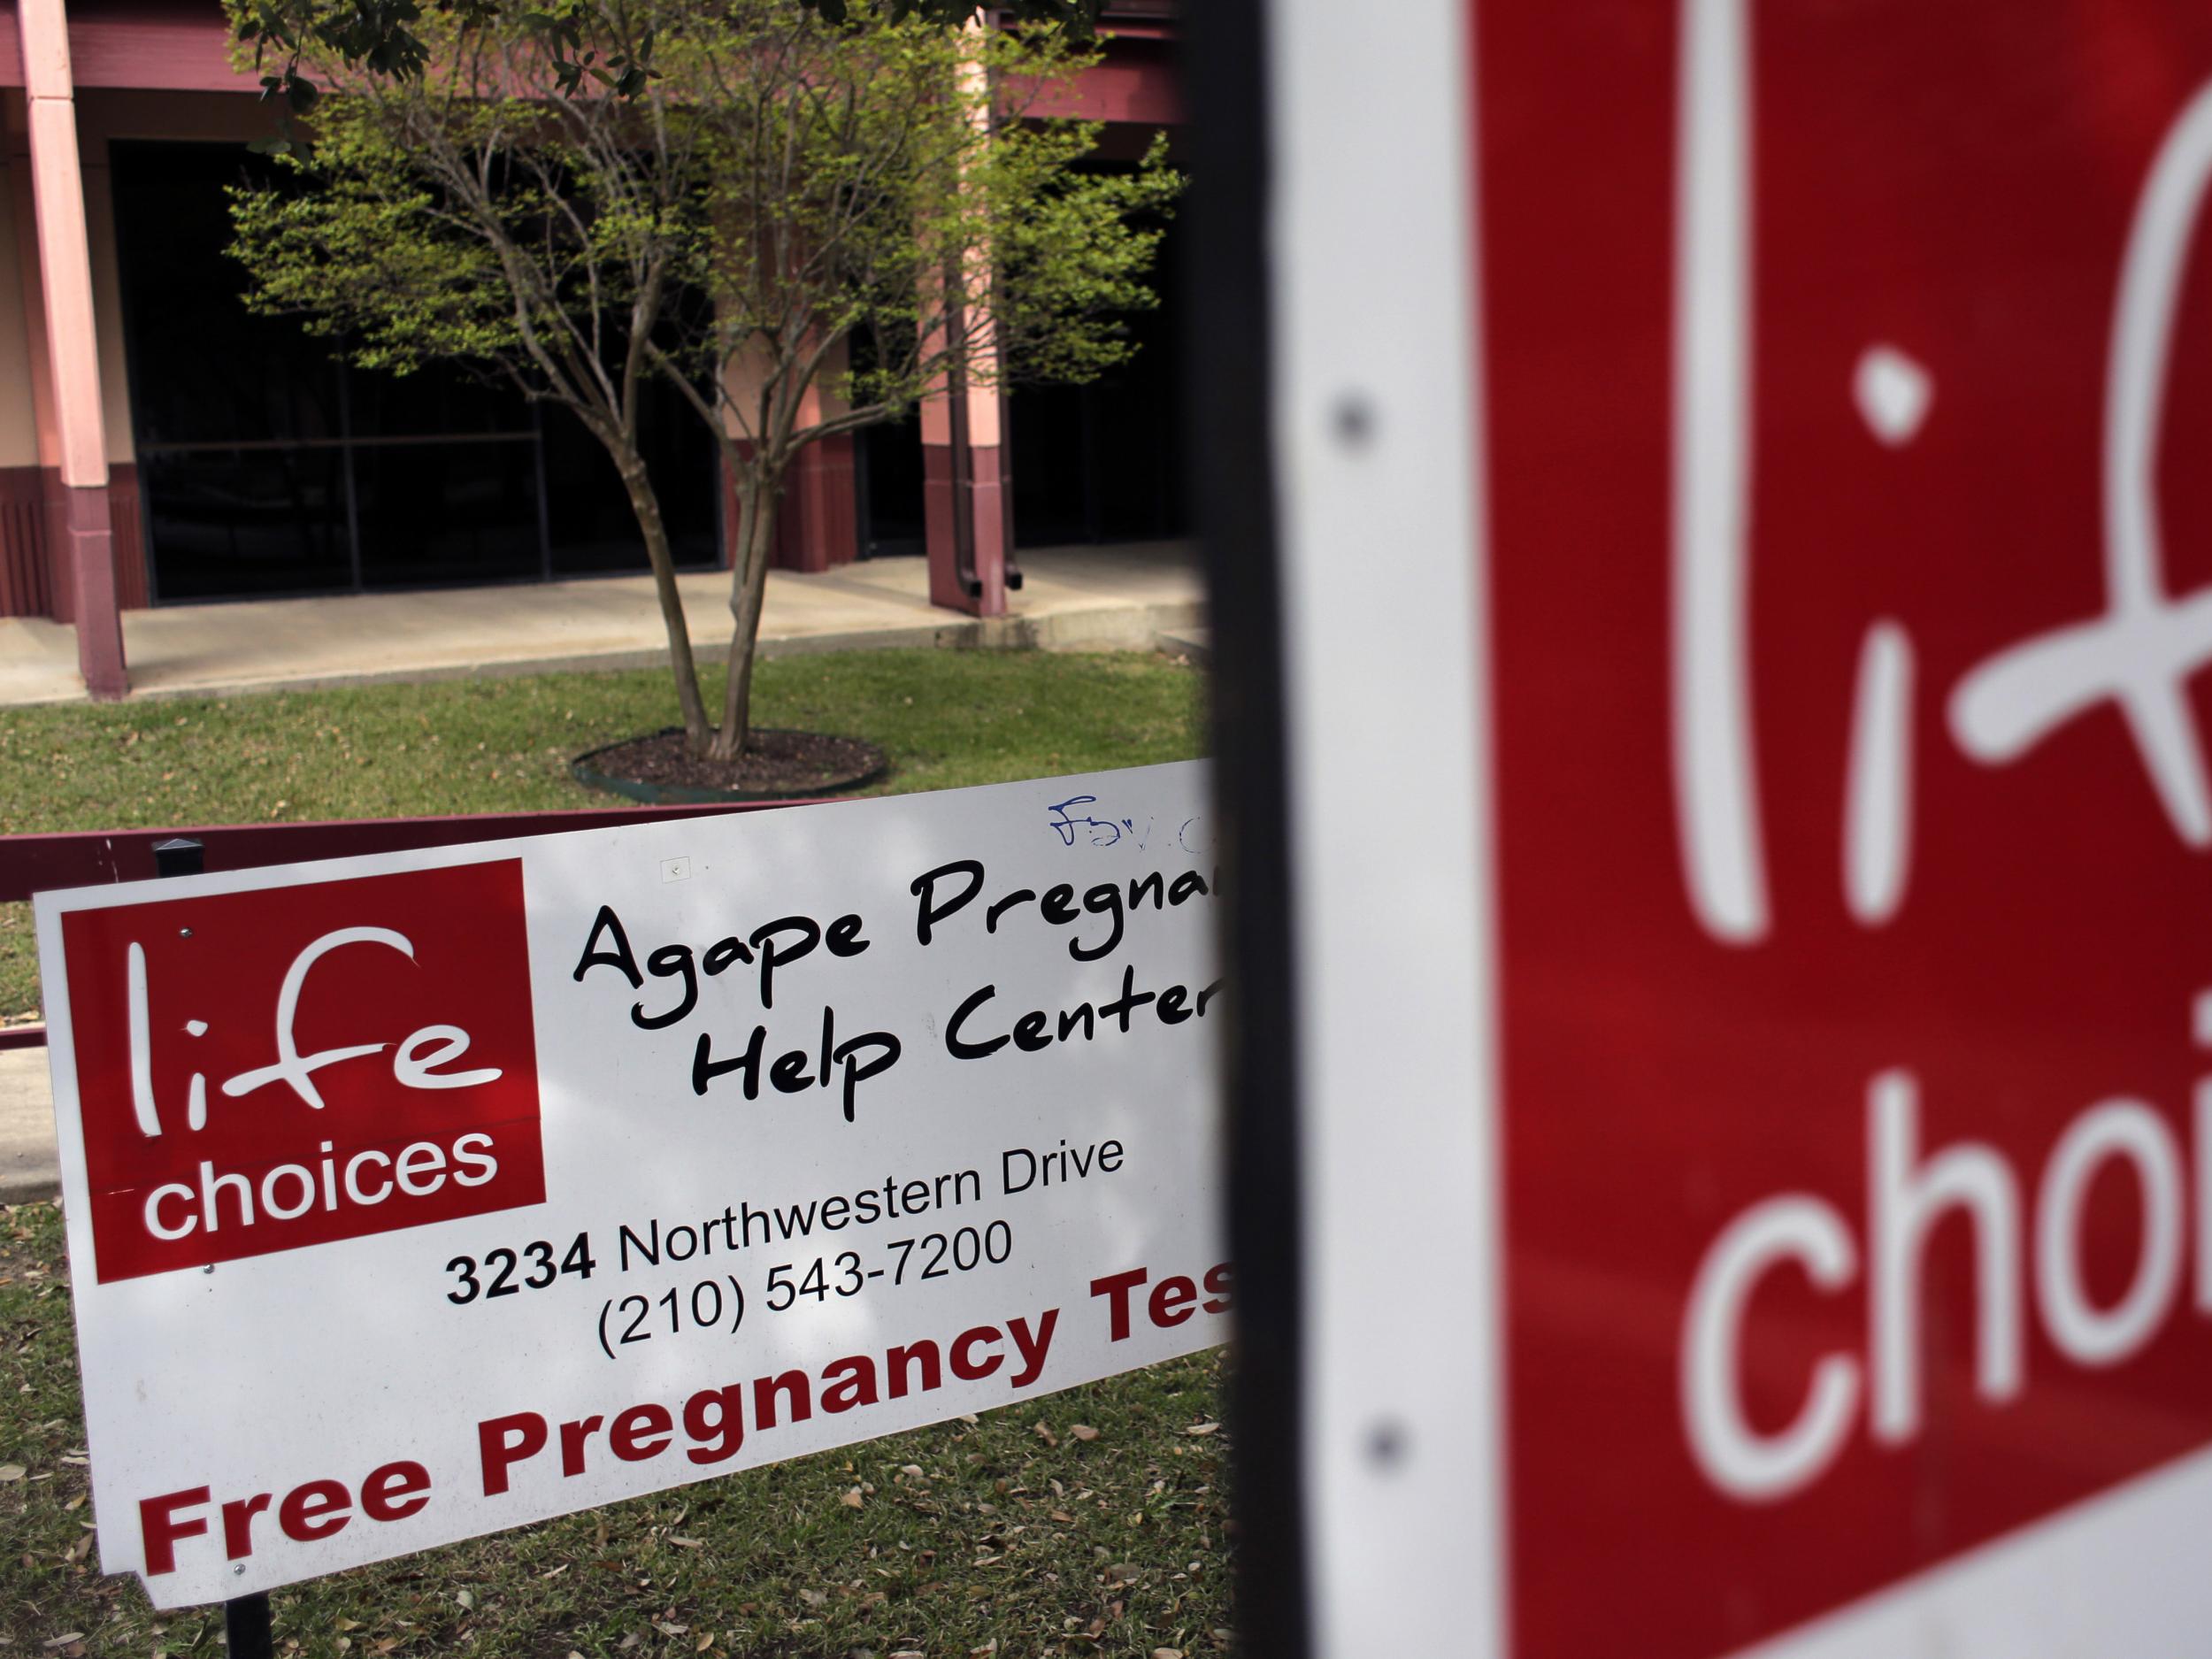 A Life Choice clinic in San Antonio, which is among roughly two dozen women's health providers in Texas working with the Heidi Group to provide similar services offered by Planned Parenthood, such as cancer screenings or treatments for sexually transmitted diseases